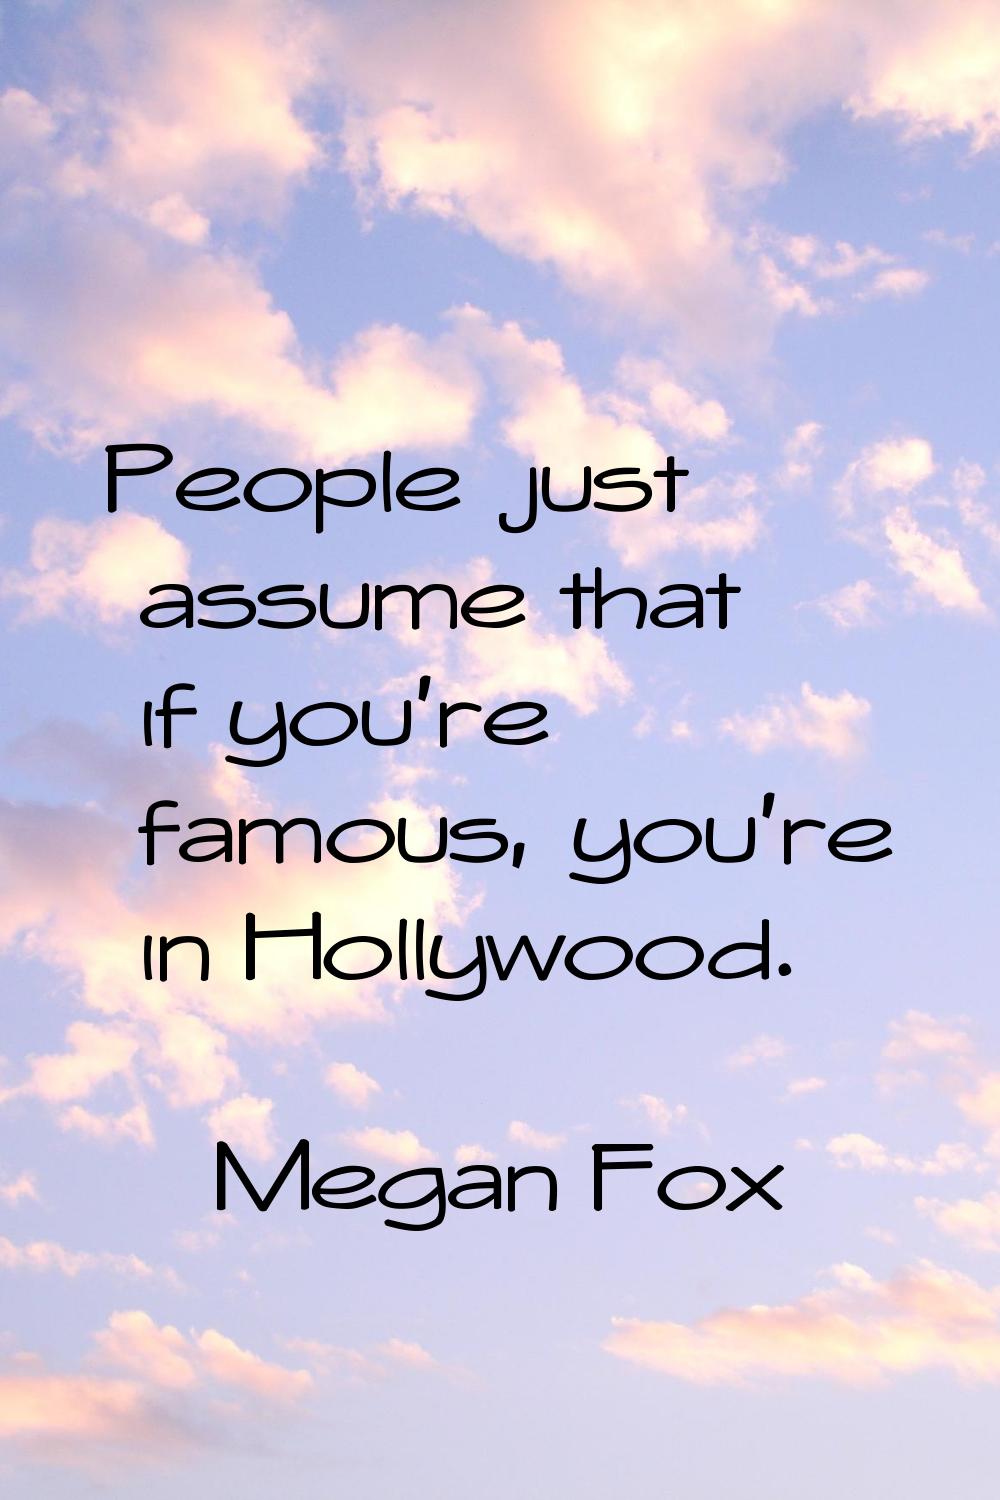 People just assume that if you're famous, you're in Hollywood.